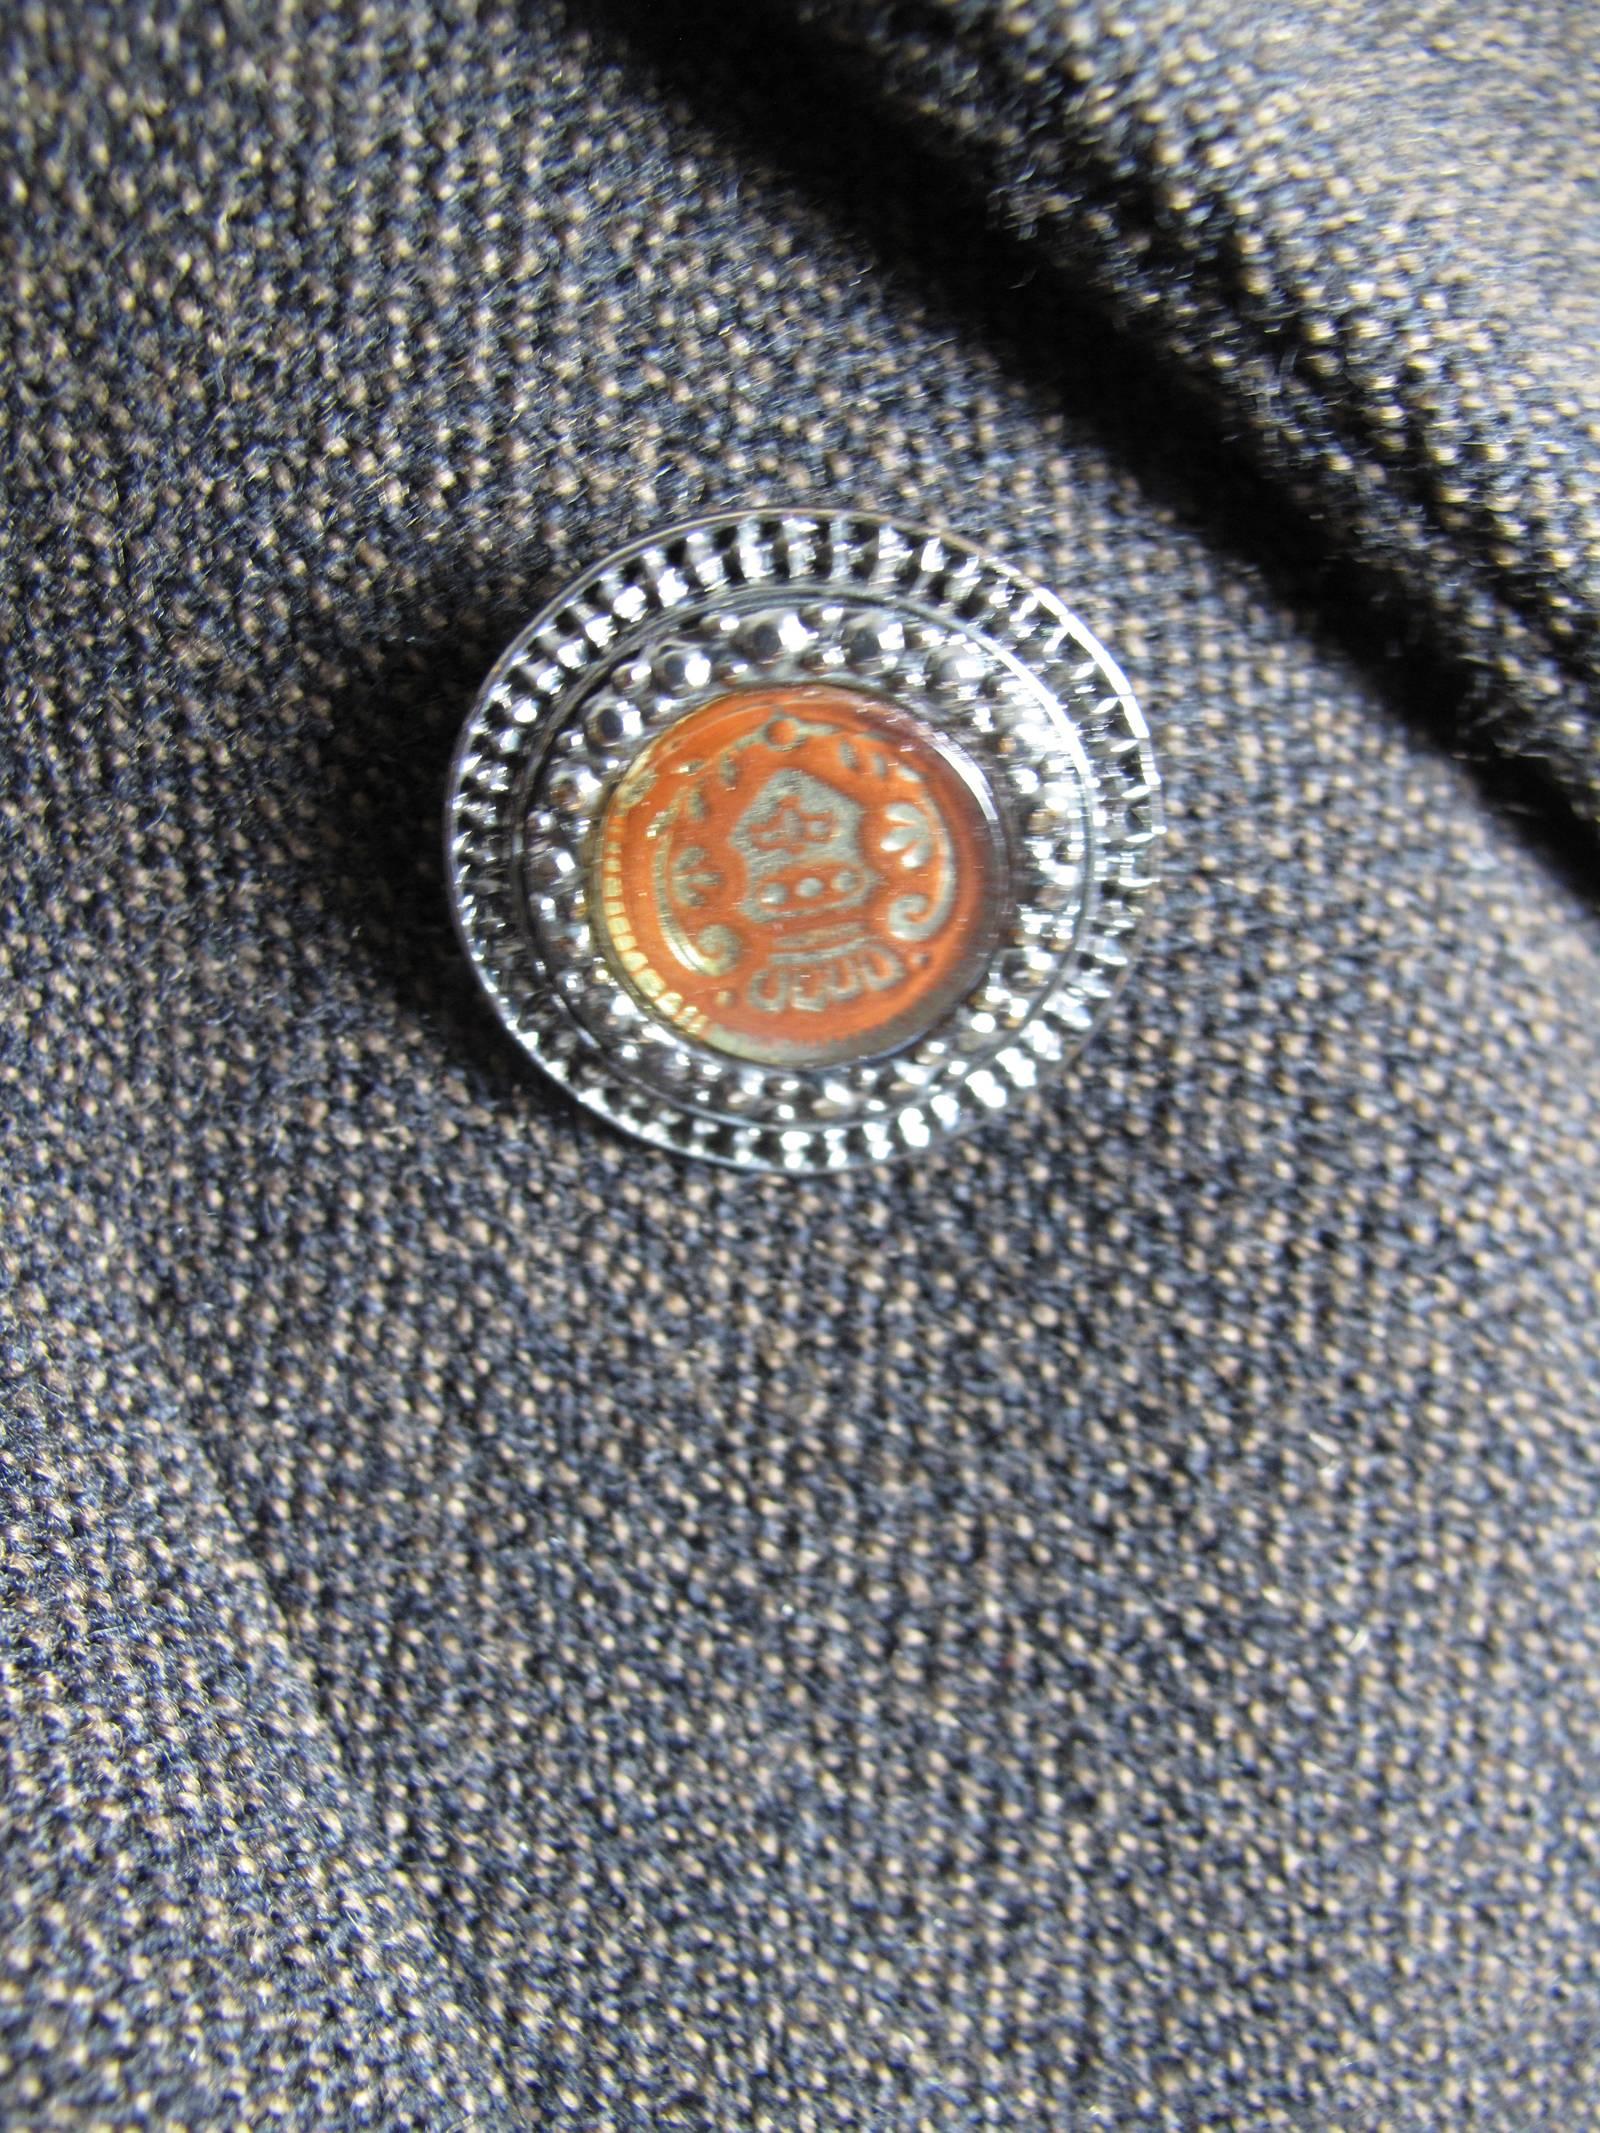 YSL rive gauche brown wool blazer with crest buttons.  Condition: Excellent. 
Size 42
